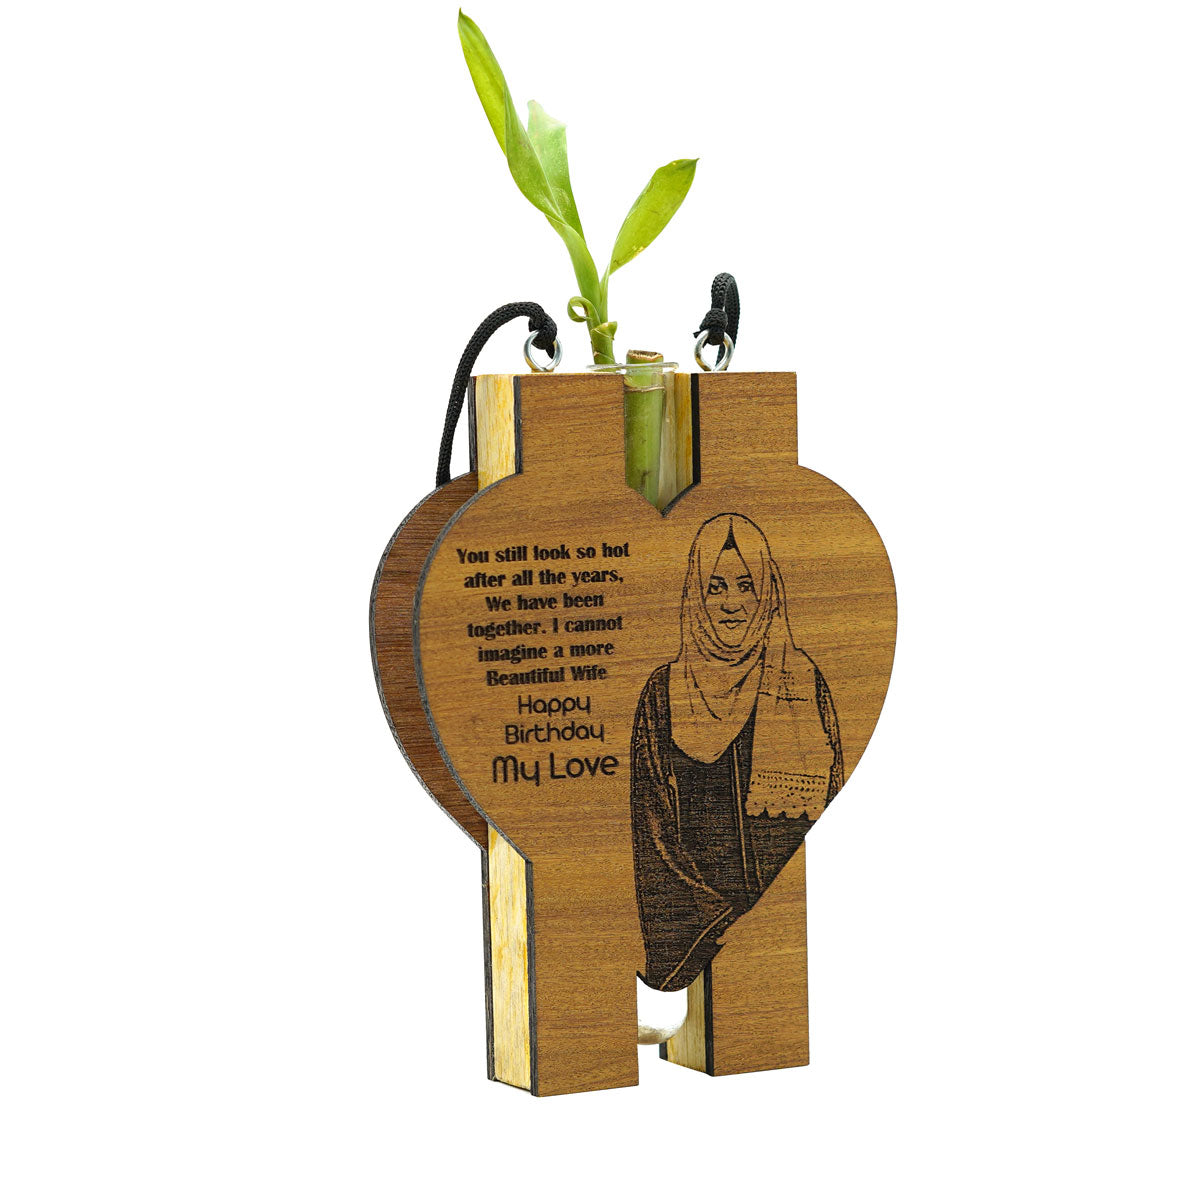 Customize Wooden Engraved Plant Vase Gift